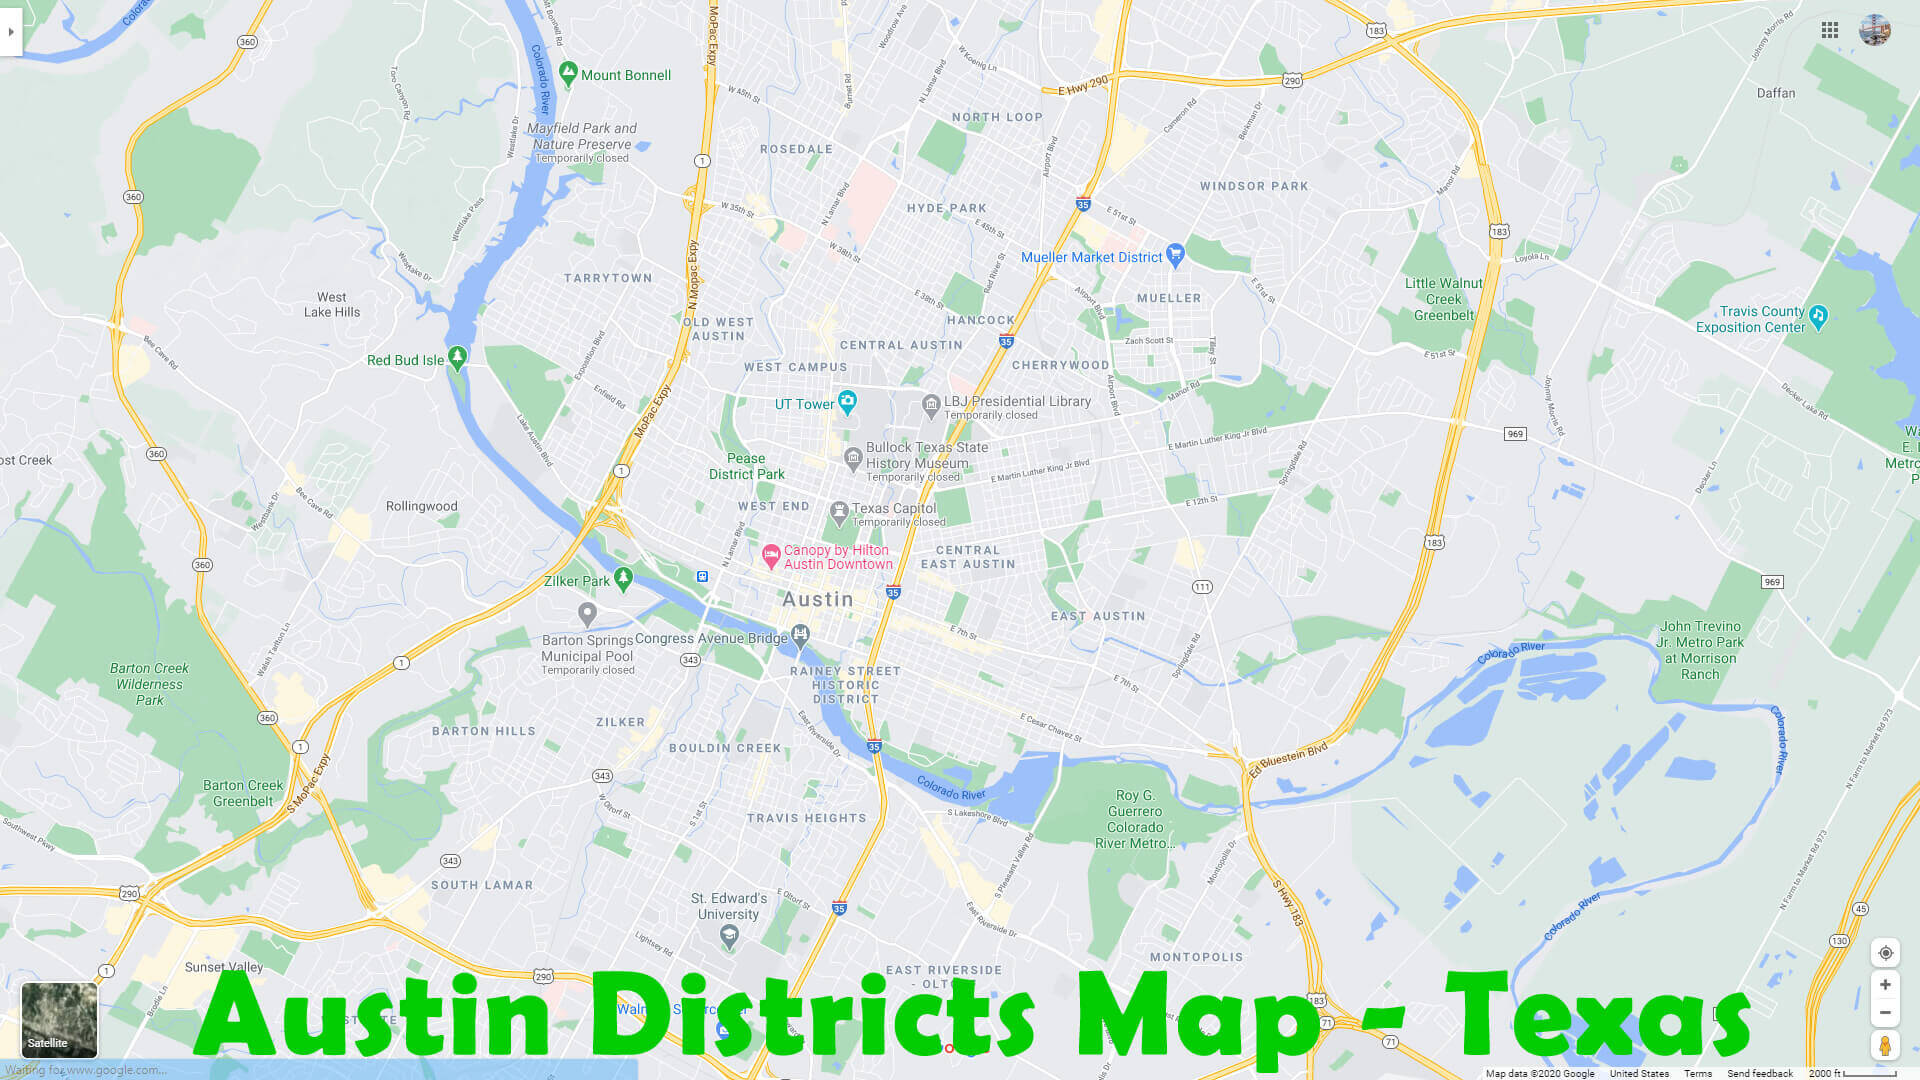 Austin Districts Map   Texas